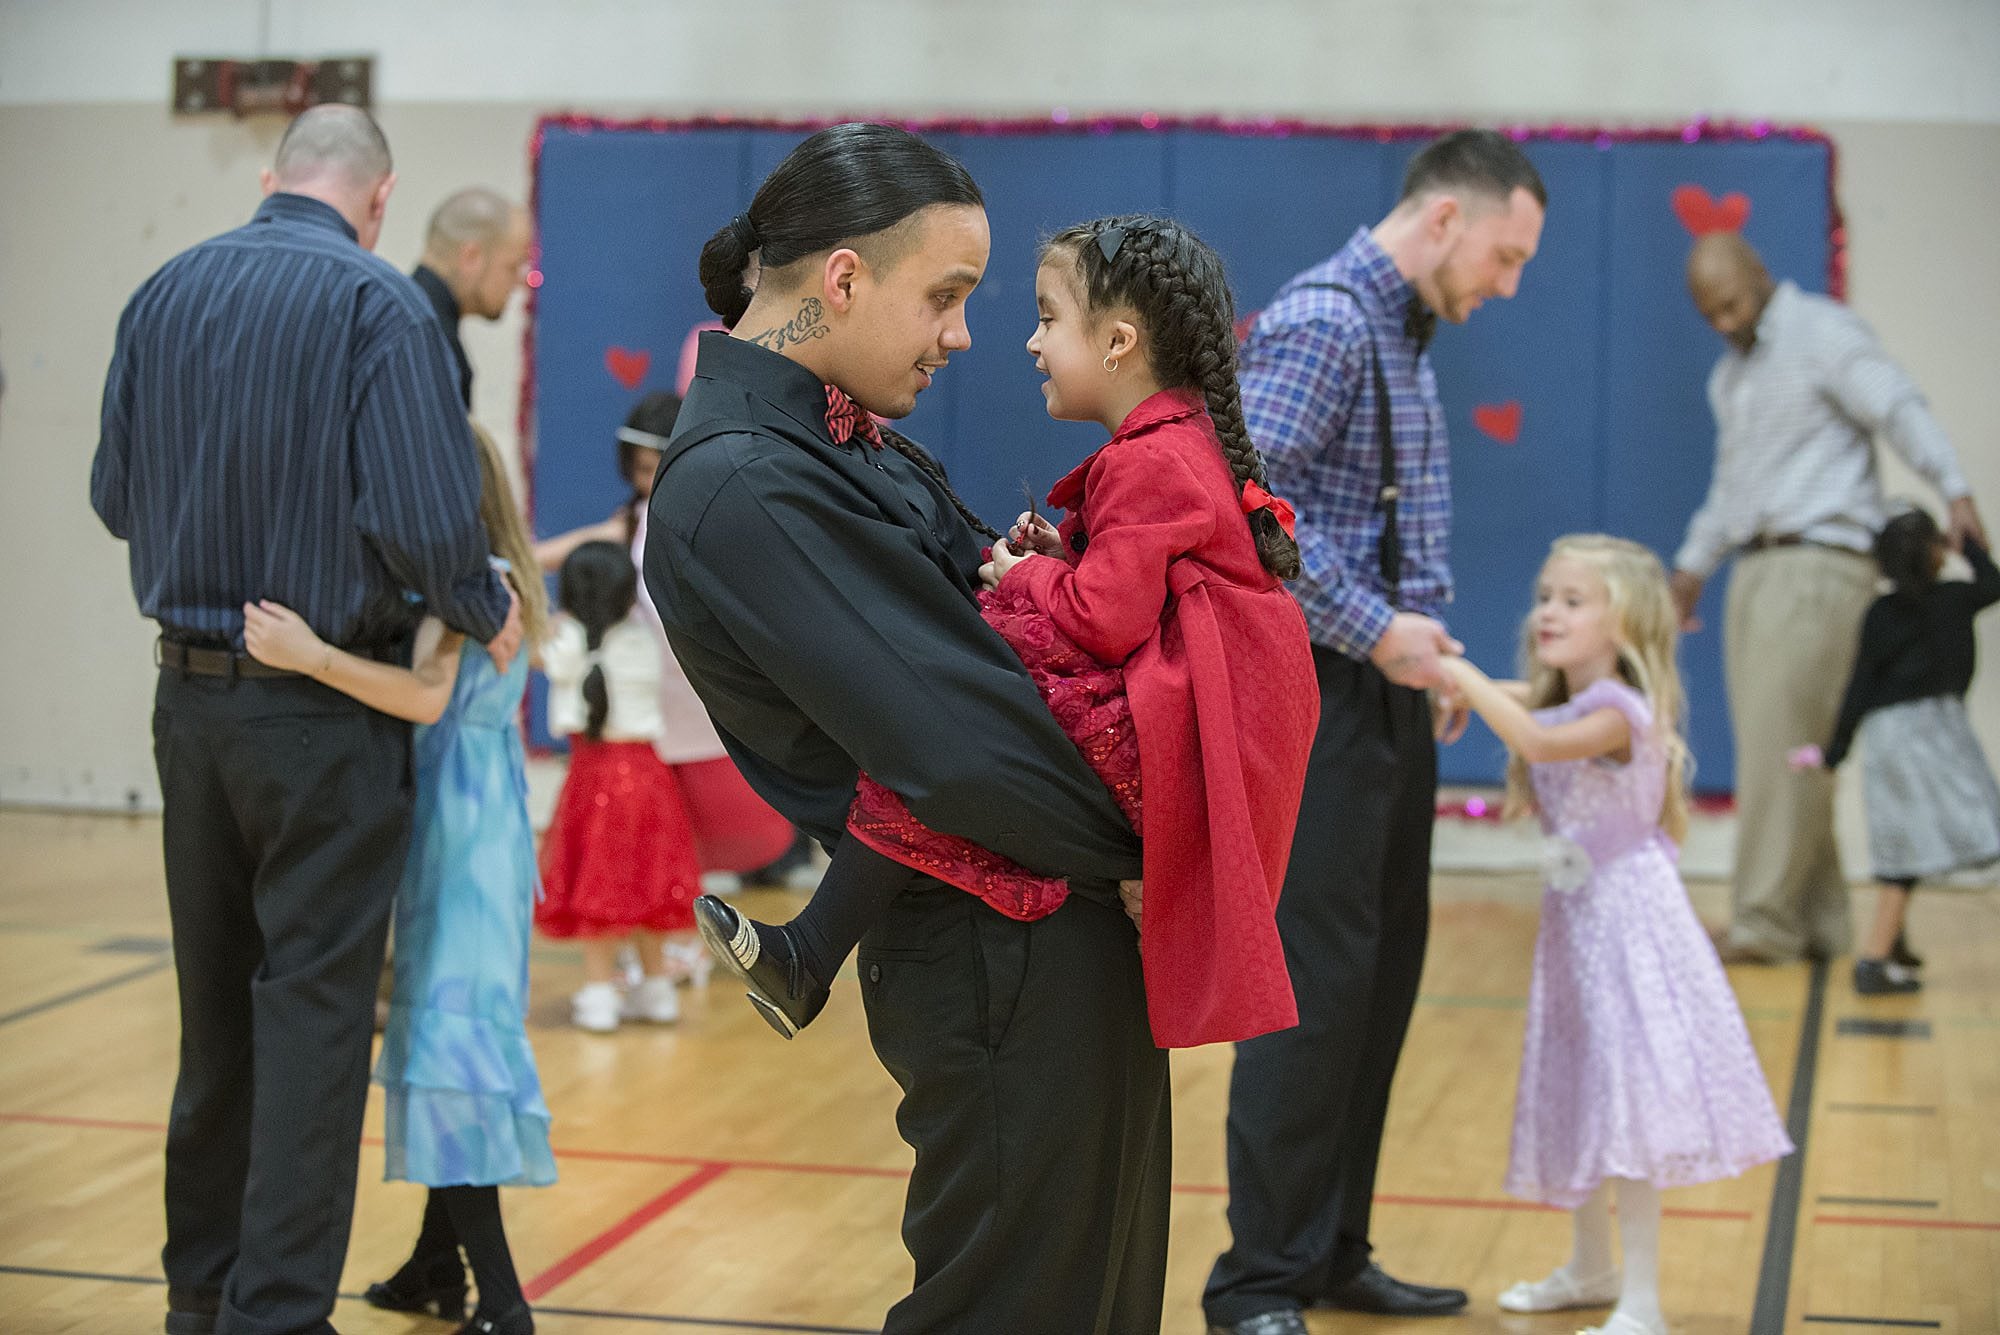 Kirk Hernandez, Jr., center, an inmate at Larch Corrections Center, takes a turn around the dance floor during a slow song with his daughter, Eternity, 5, on Saturday afternoon, Feb. 13, 2016 during the Larch Corrections Father Daughter Dance 2016.